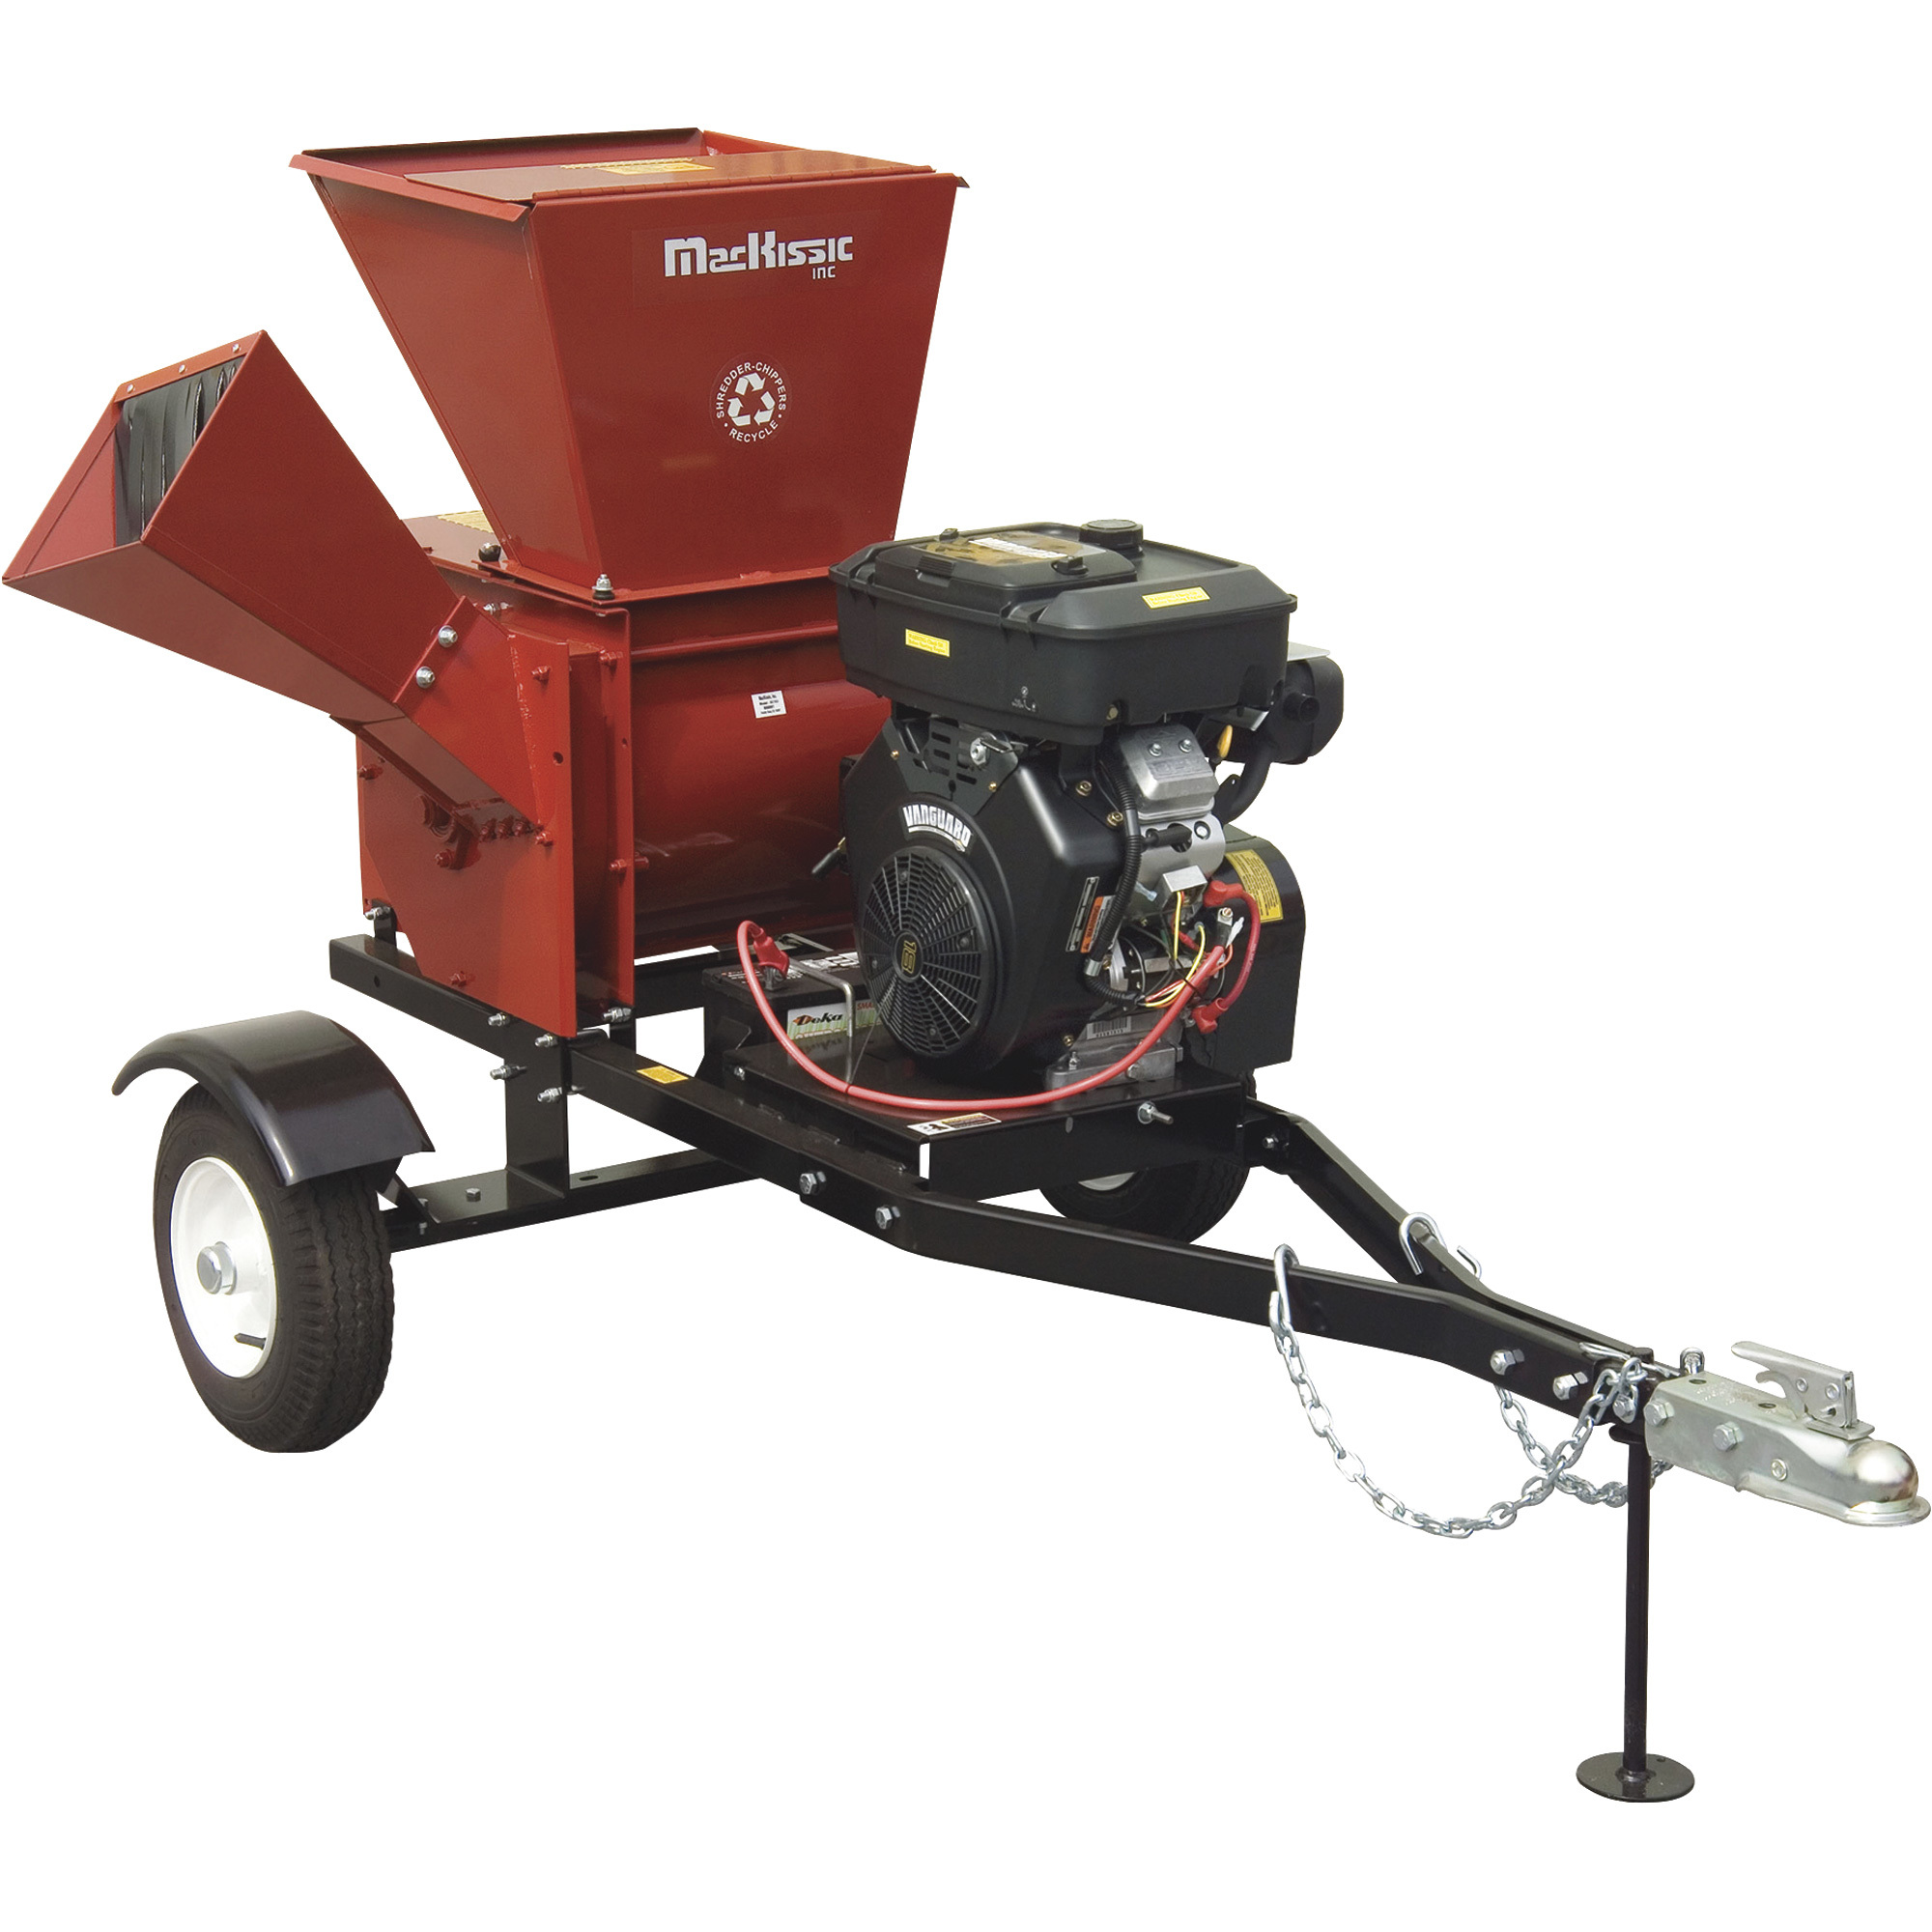 Merry Mac Highway-Towable Chipper/Shredder — Briggs & Stratton XR2100 Professional Series 13.5 Gross HP Engine, 4 1/2Inch Chipping Capacity, Model -  SC185EM